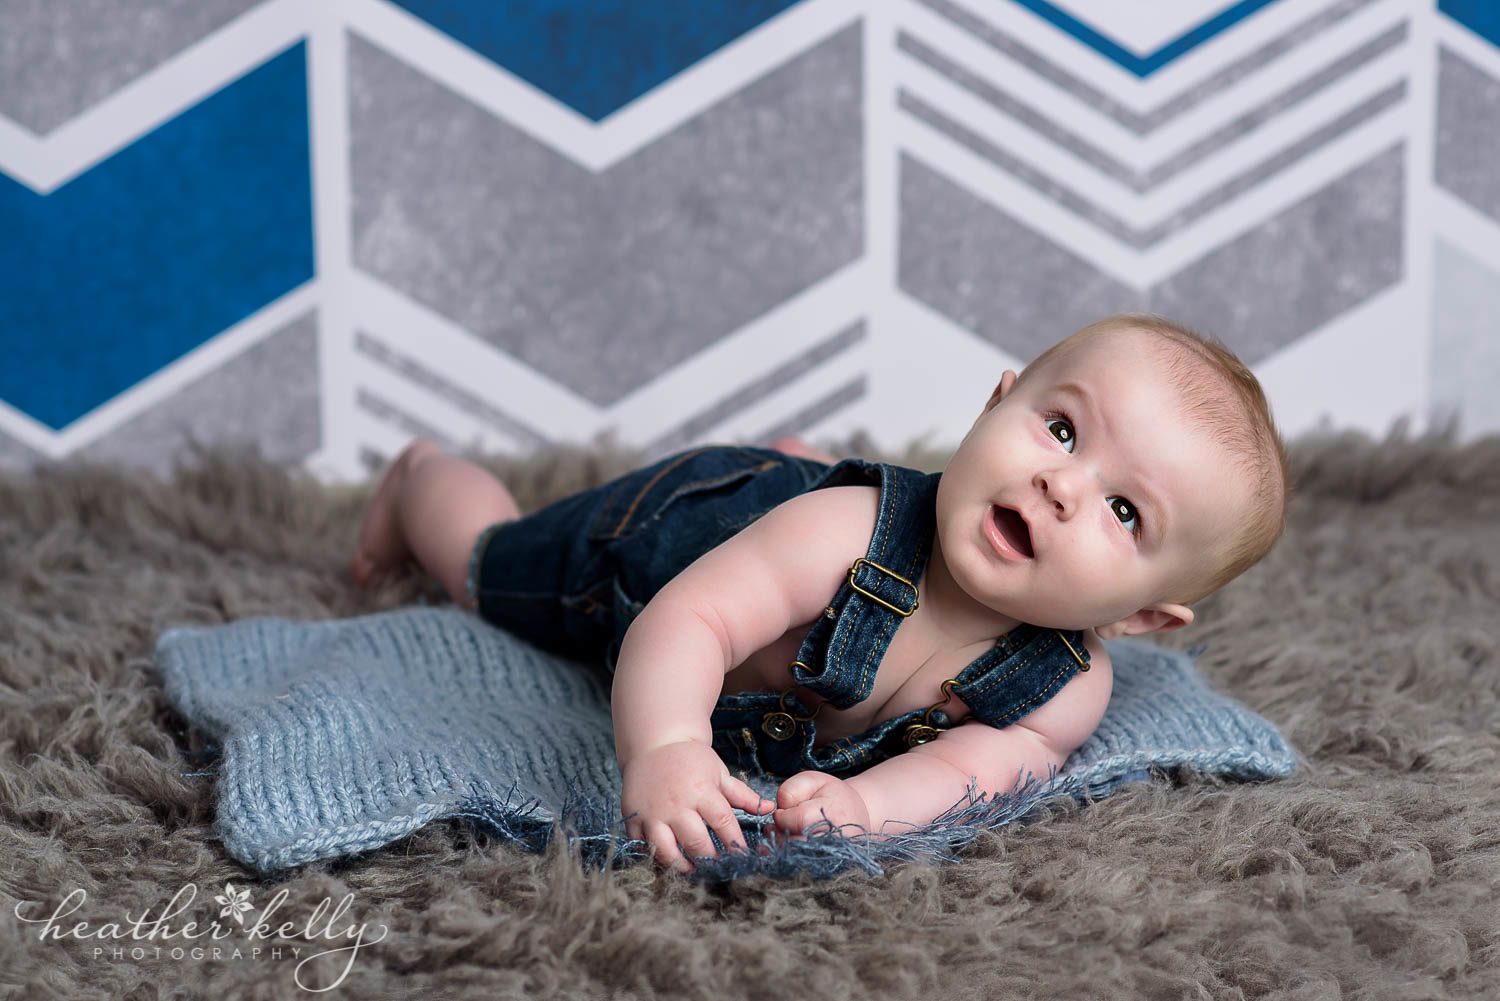 baby boy 6 months about to roll over during photo session. danbury baby boy